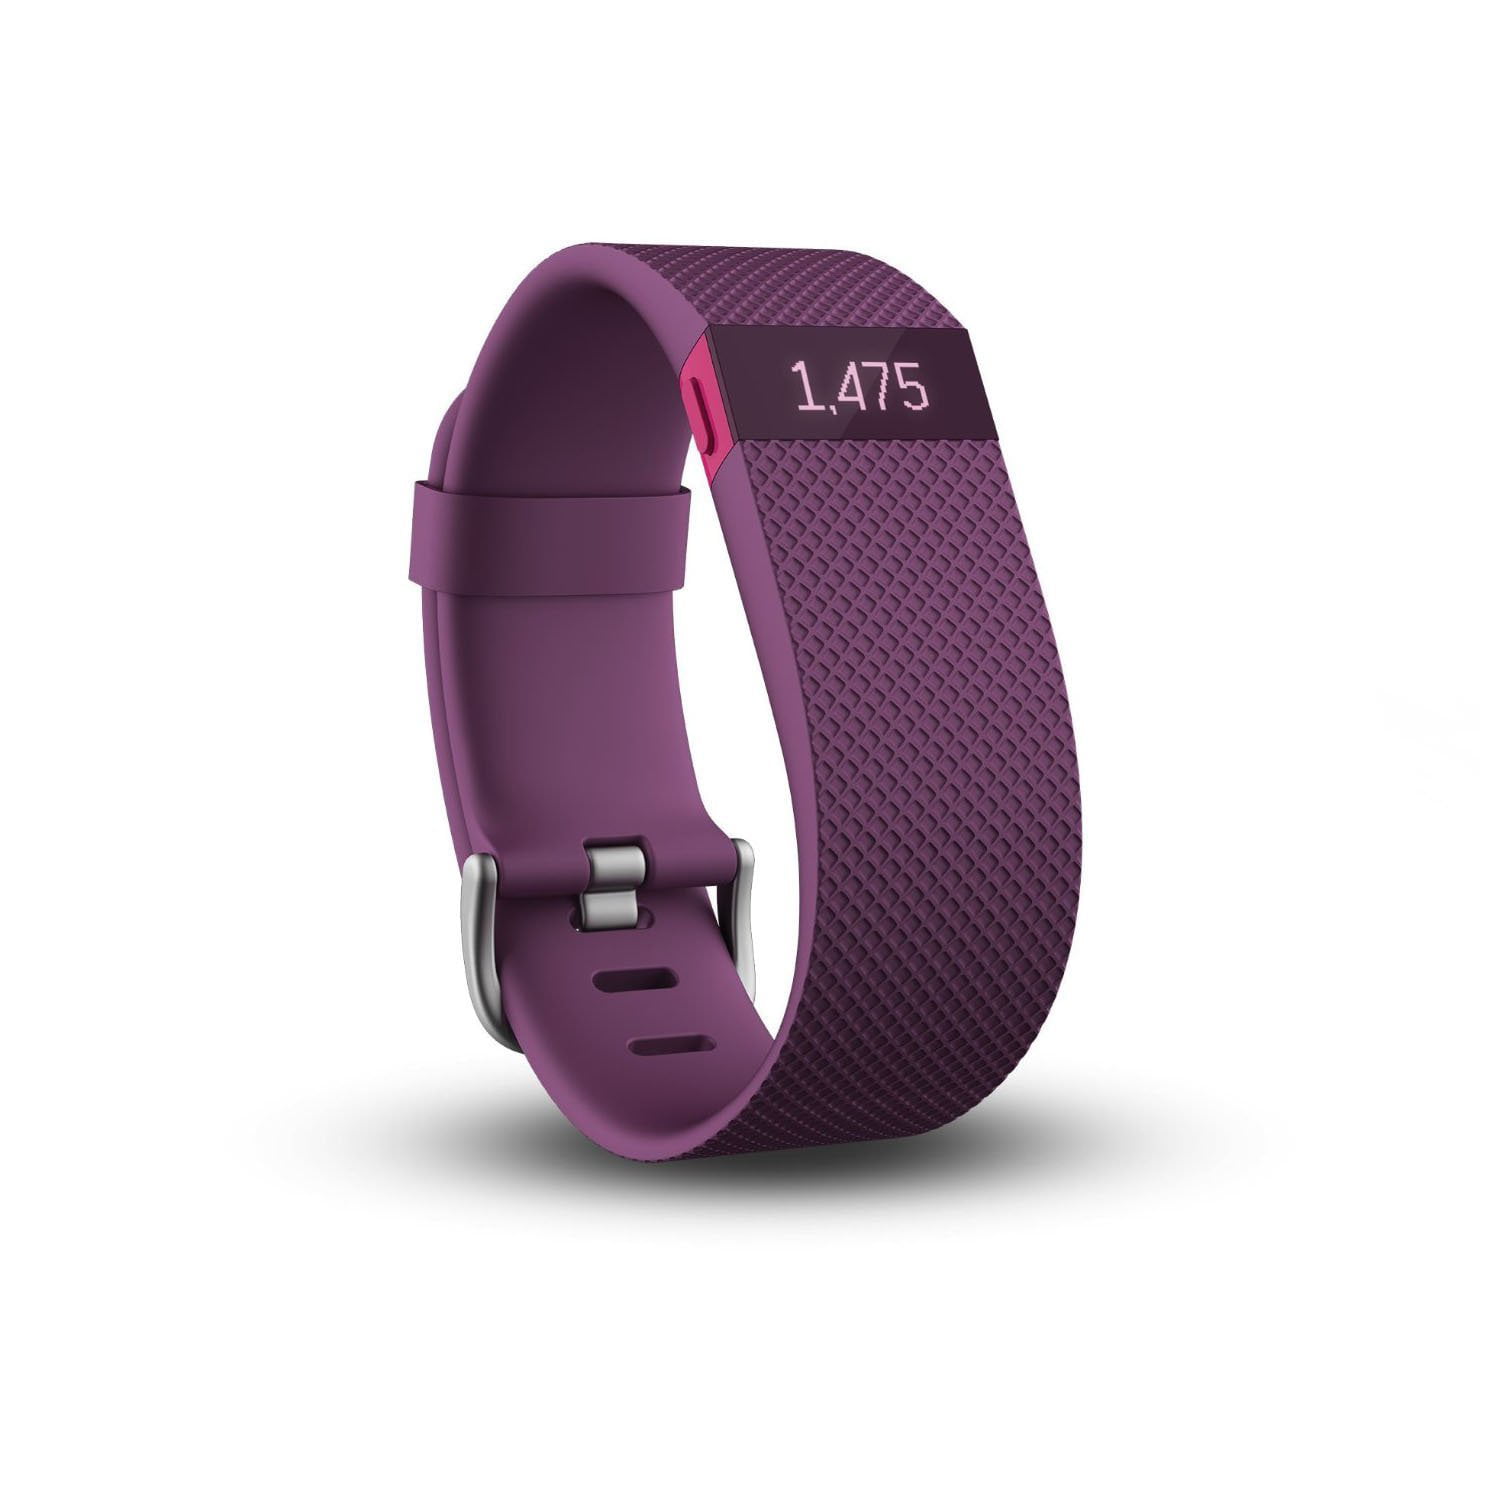 Small Fb405bus for sale online Fitbit Charge HR Wireless Activity Wristband Android IOS Blue 